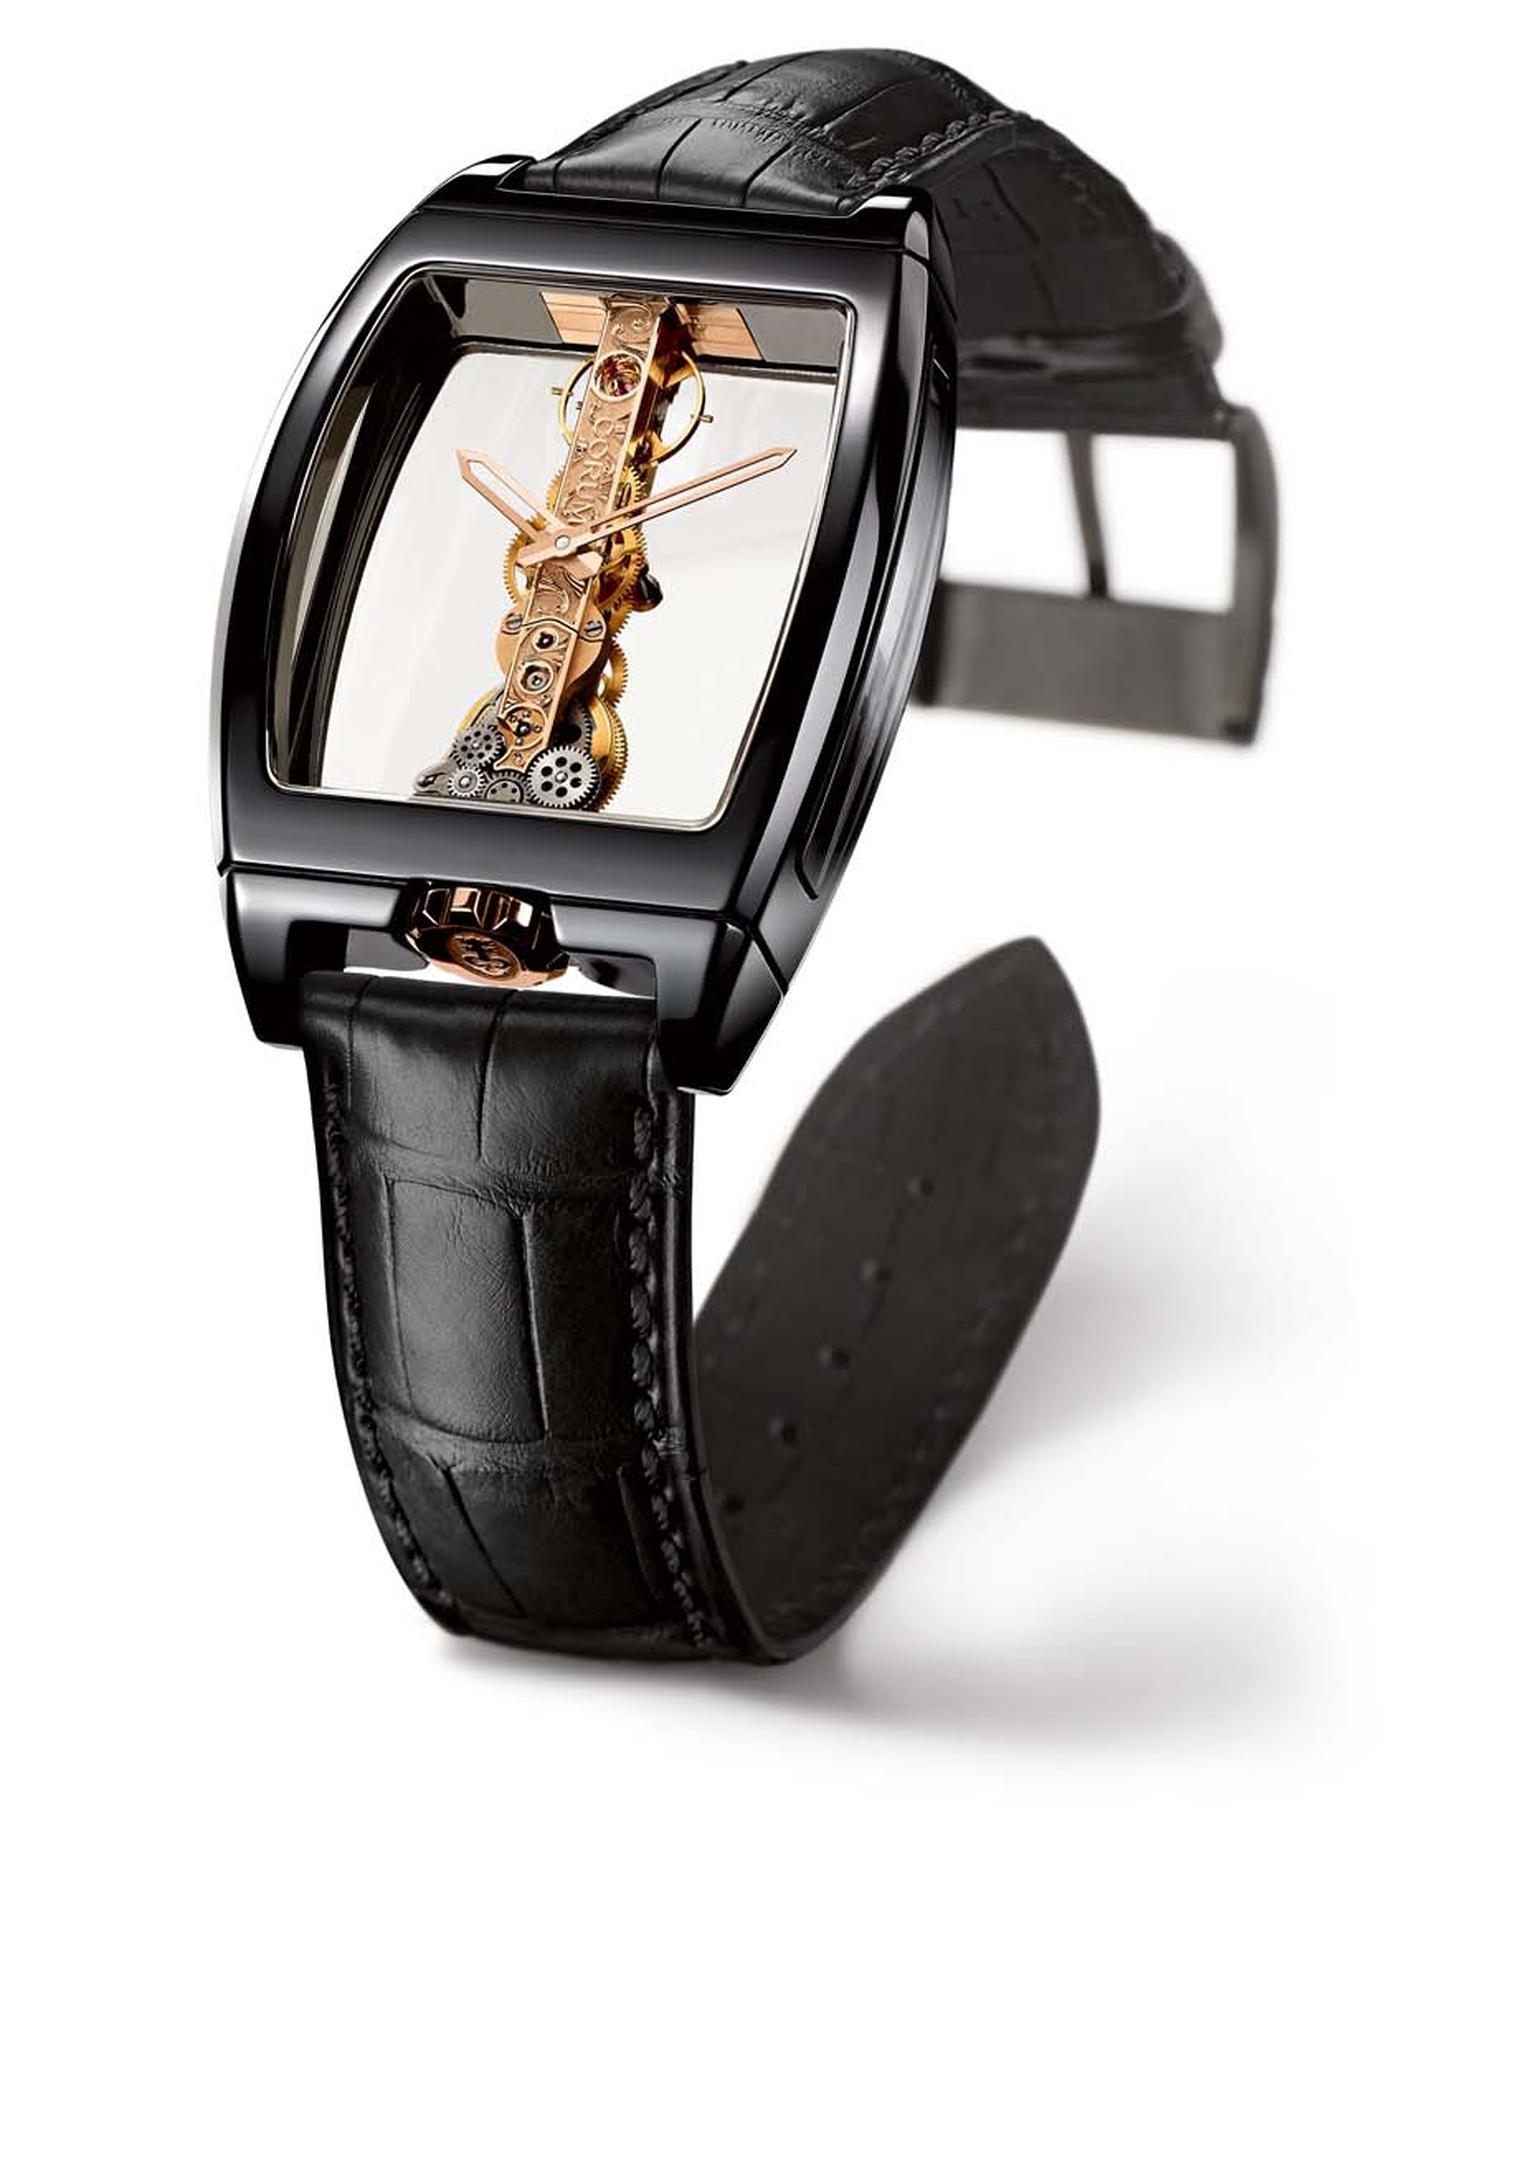 Corum’s Golden Bridge Ceramic Noire features a gold movement set along just one slim axis with its entire workings visible through the see-through construction of the watchcase.